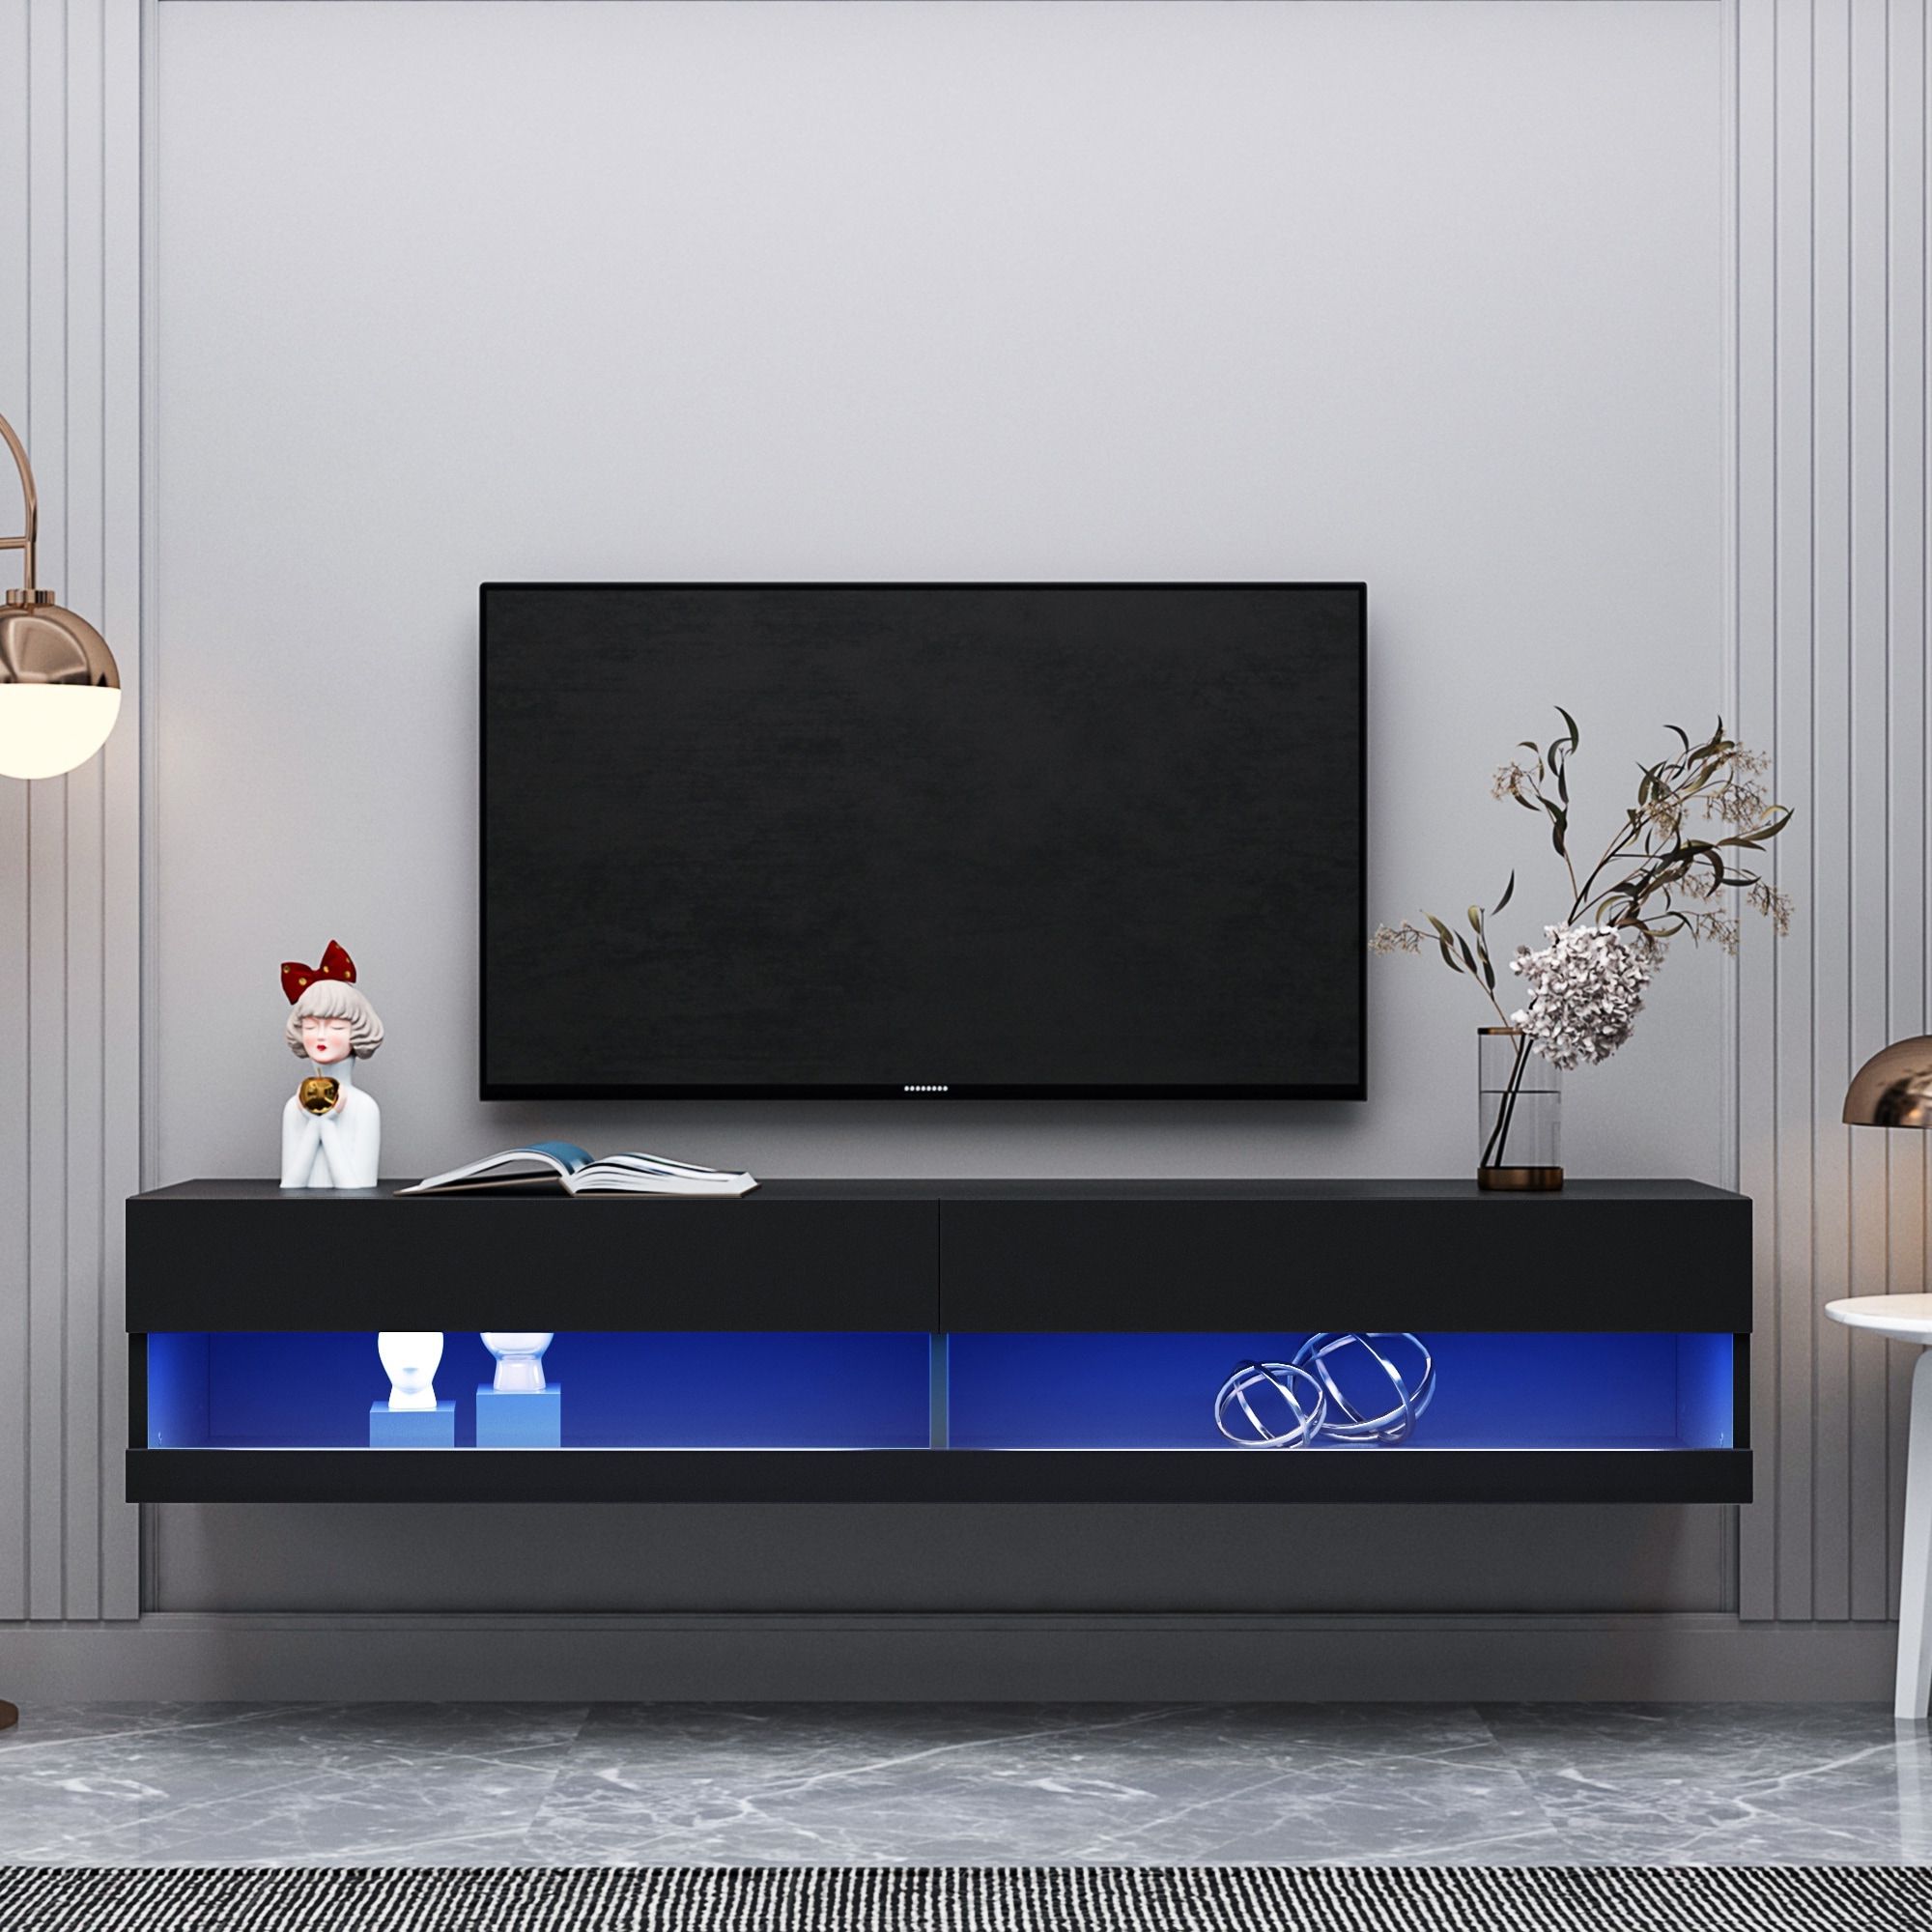 Wall Mounted Floating Tv Stand With Led Lights And Storage Compartments –  Bed Bath & Beyond – 38286386 Throughout Wall Mounted Floating Tv Stands (Gallery 9 of 20)